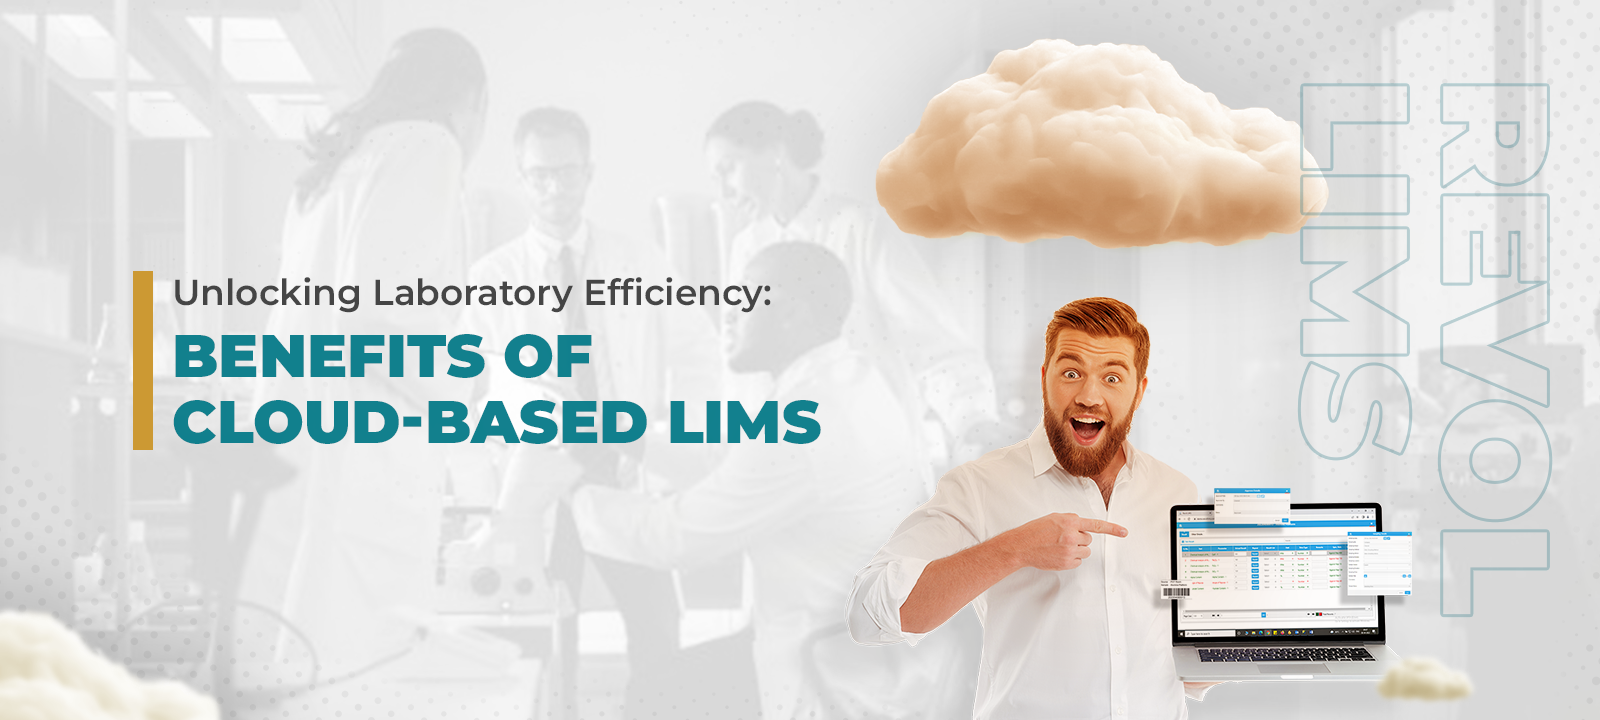  A man in a lab holding a laptop with a cloud above his head and text that says “Unlocking Laboratory Efficiency: Benefits of Cloud-Based LIMS